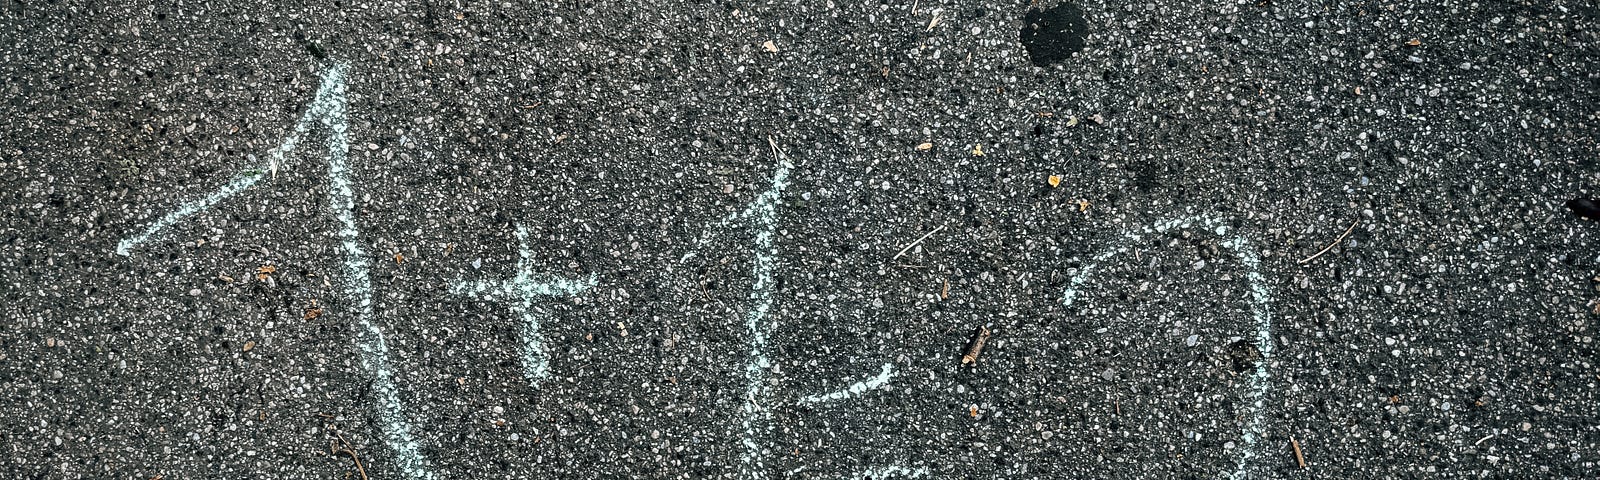 A simple math equation — 1 + 1 = 2 — is written on the ground by a child.